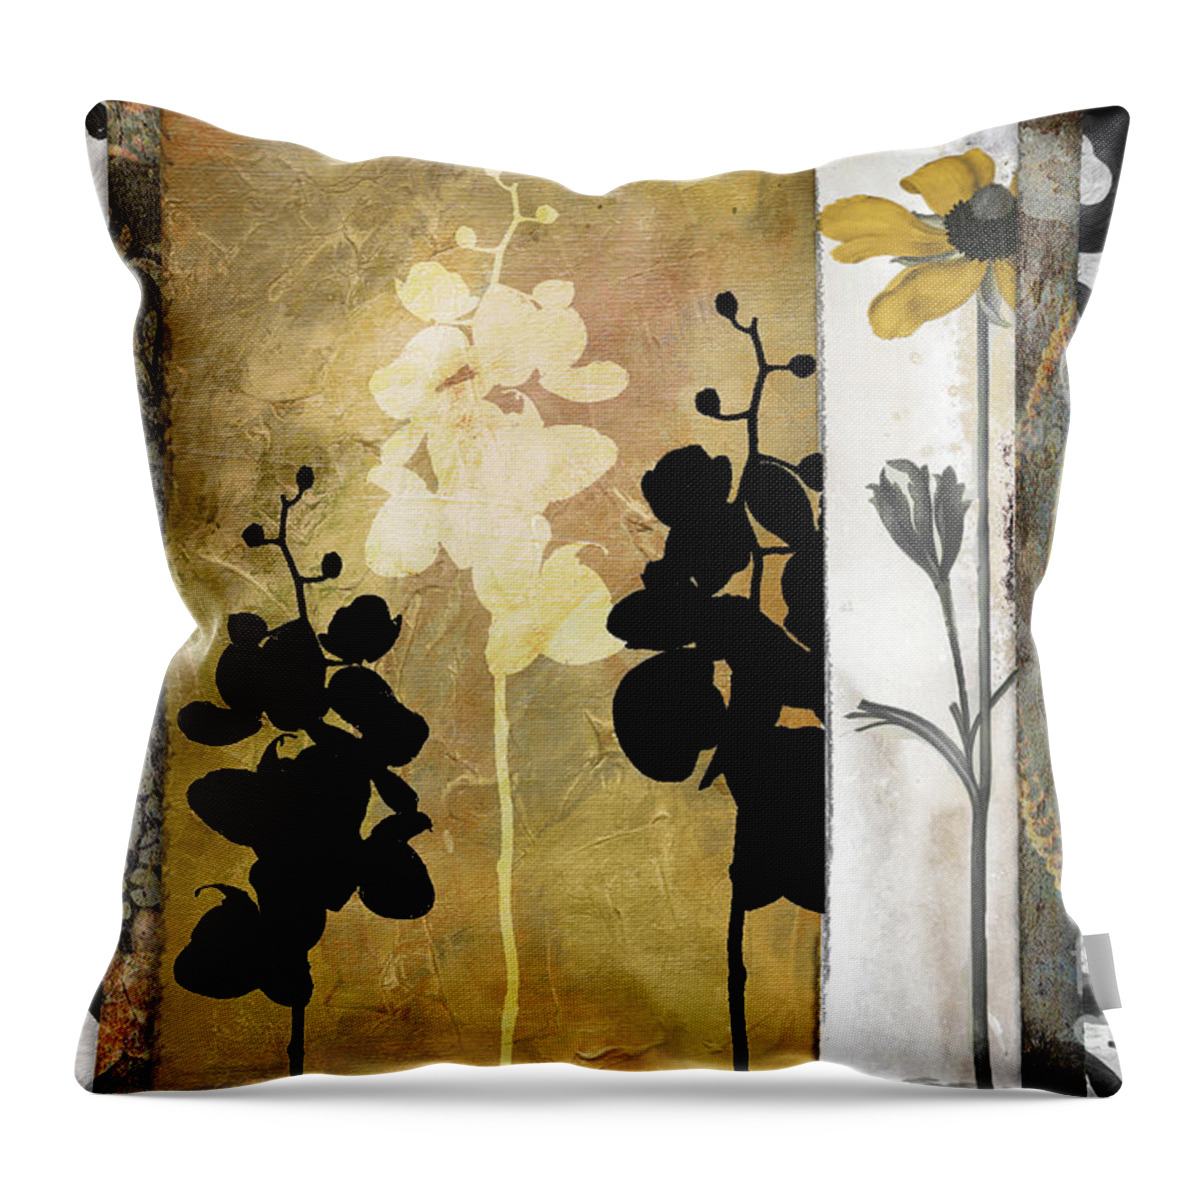 Flowers Throw Pillow featuring the painting Gardenscape I by Mindy Sommers